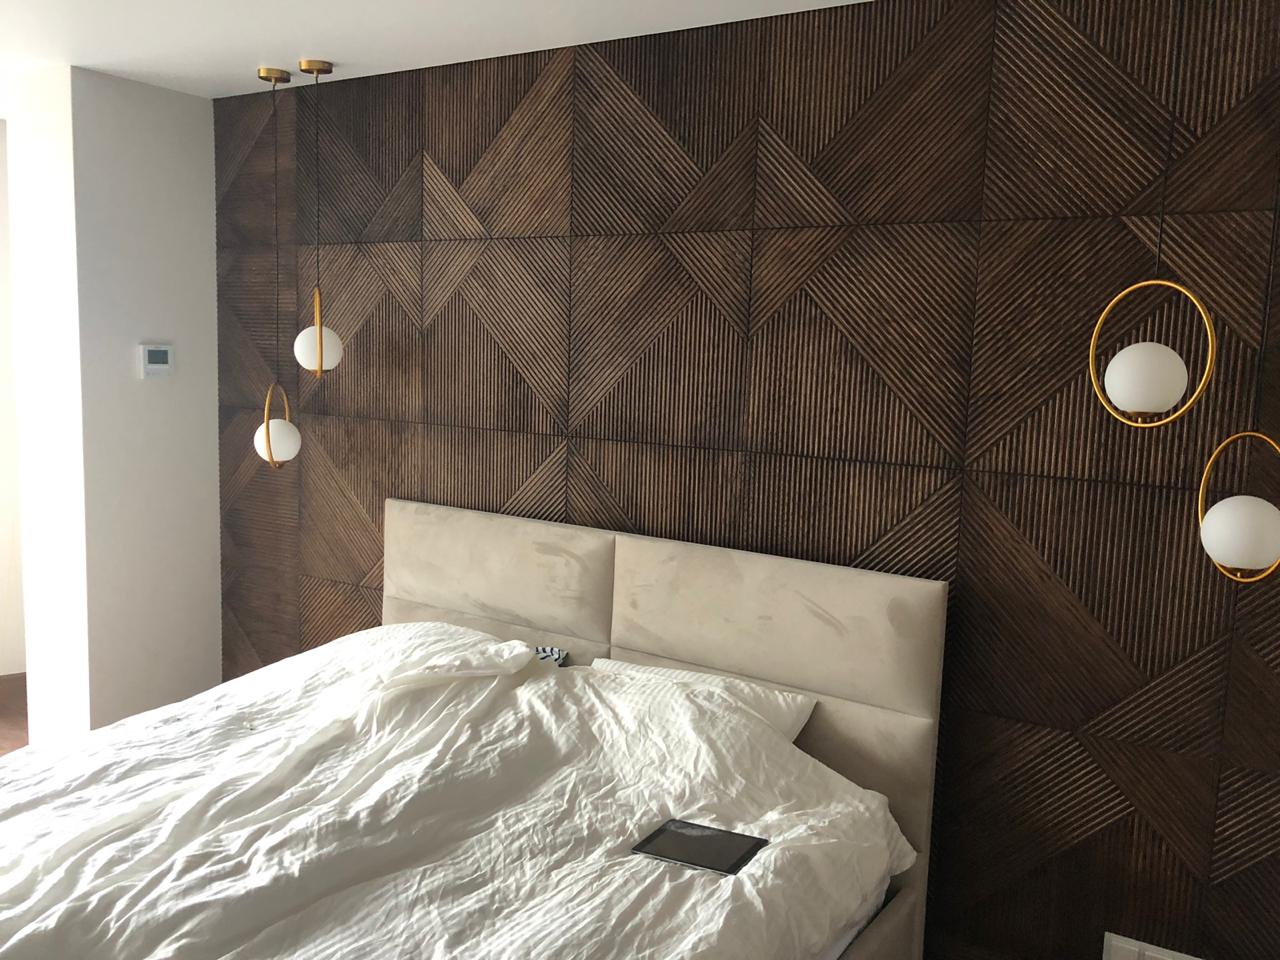 Wooden wall panels 3D. An objective look at fashionable finishes